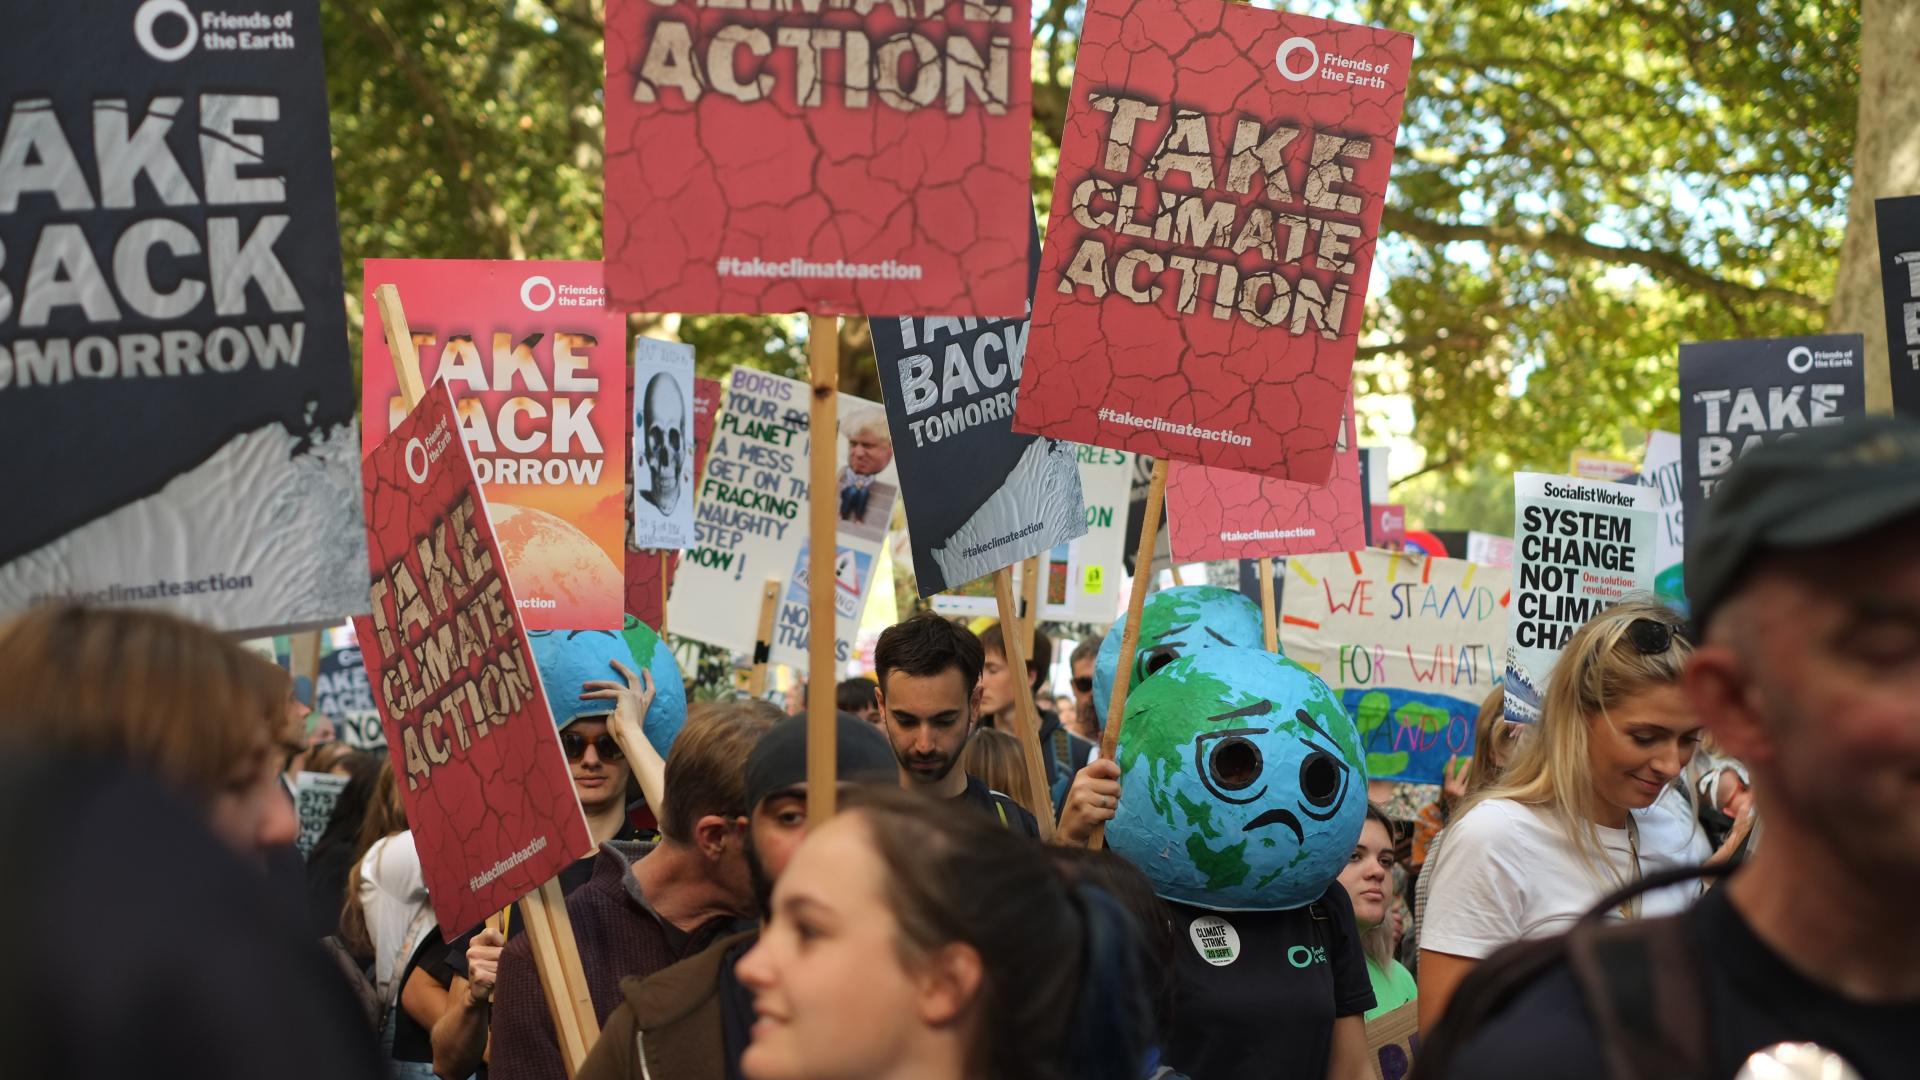 People with placards marching for climate justice in London